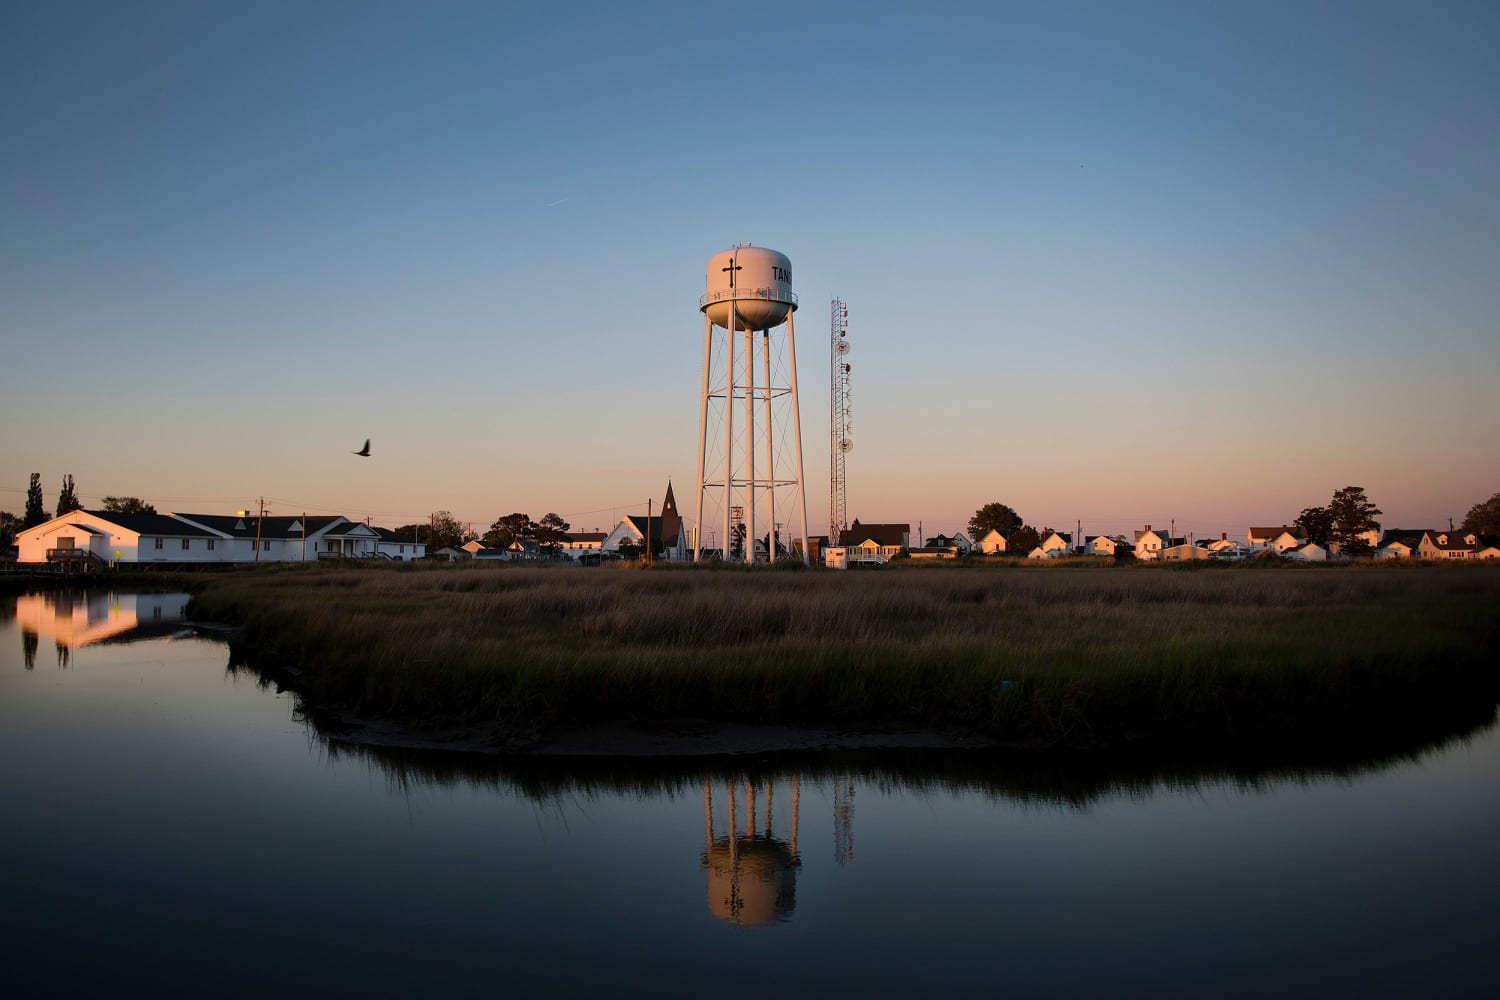 Tangier island is sinking faster than once thought, study finds